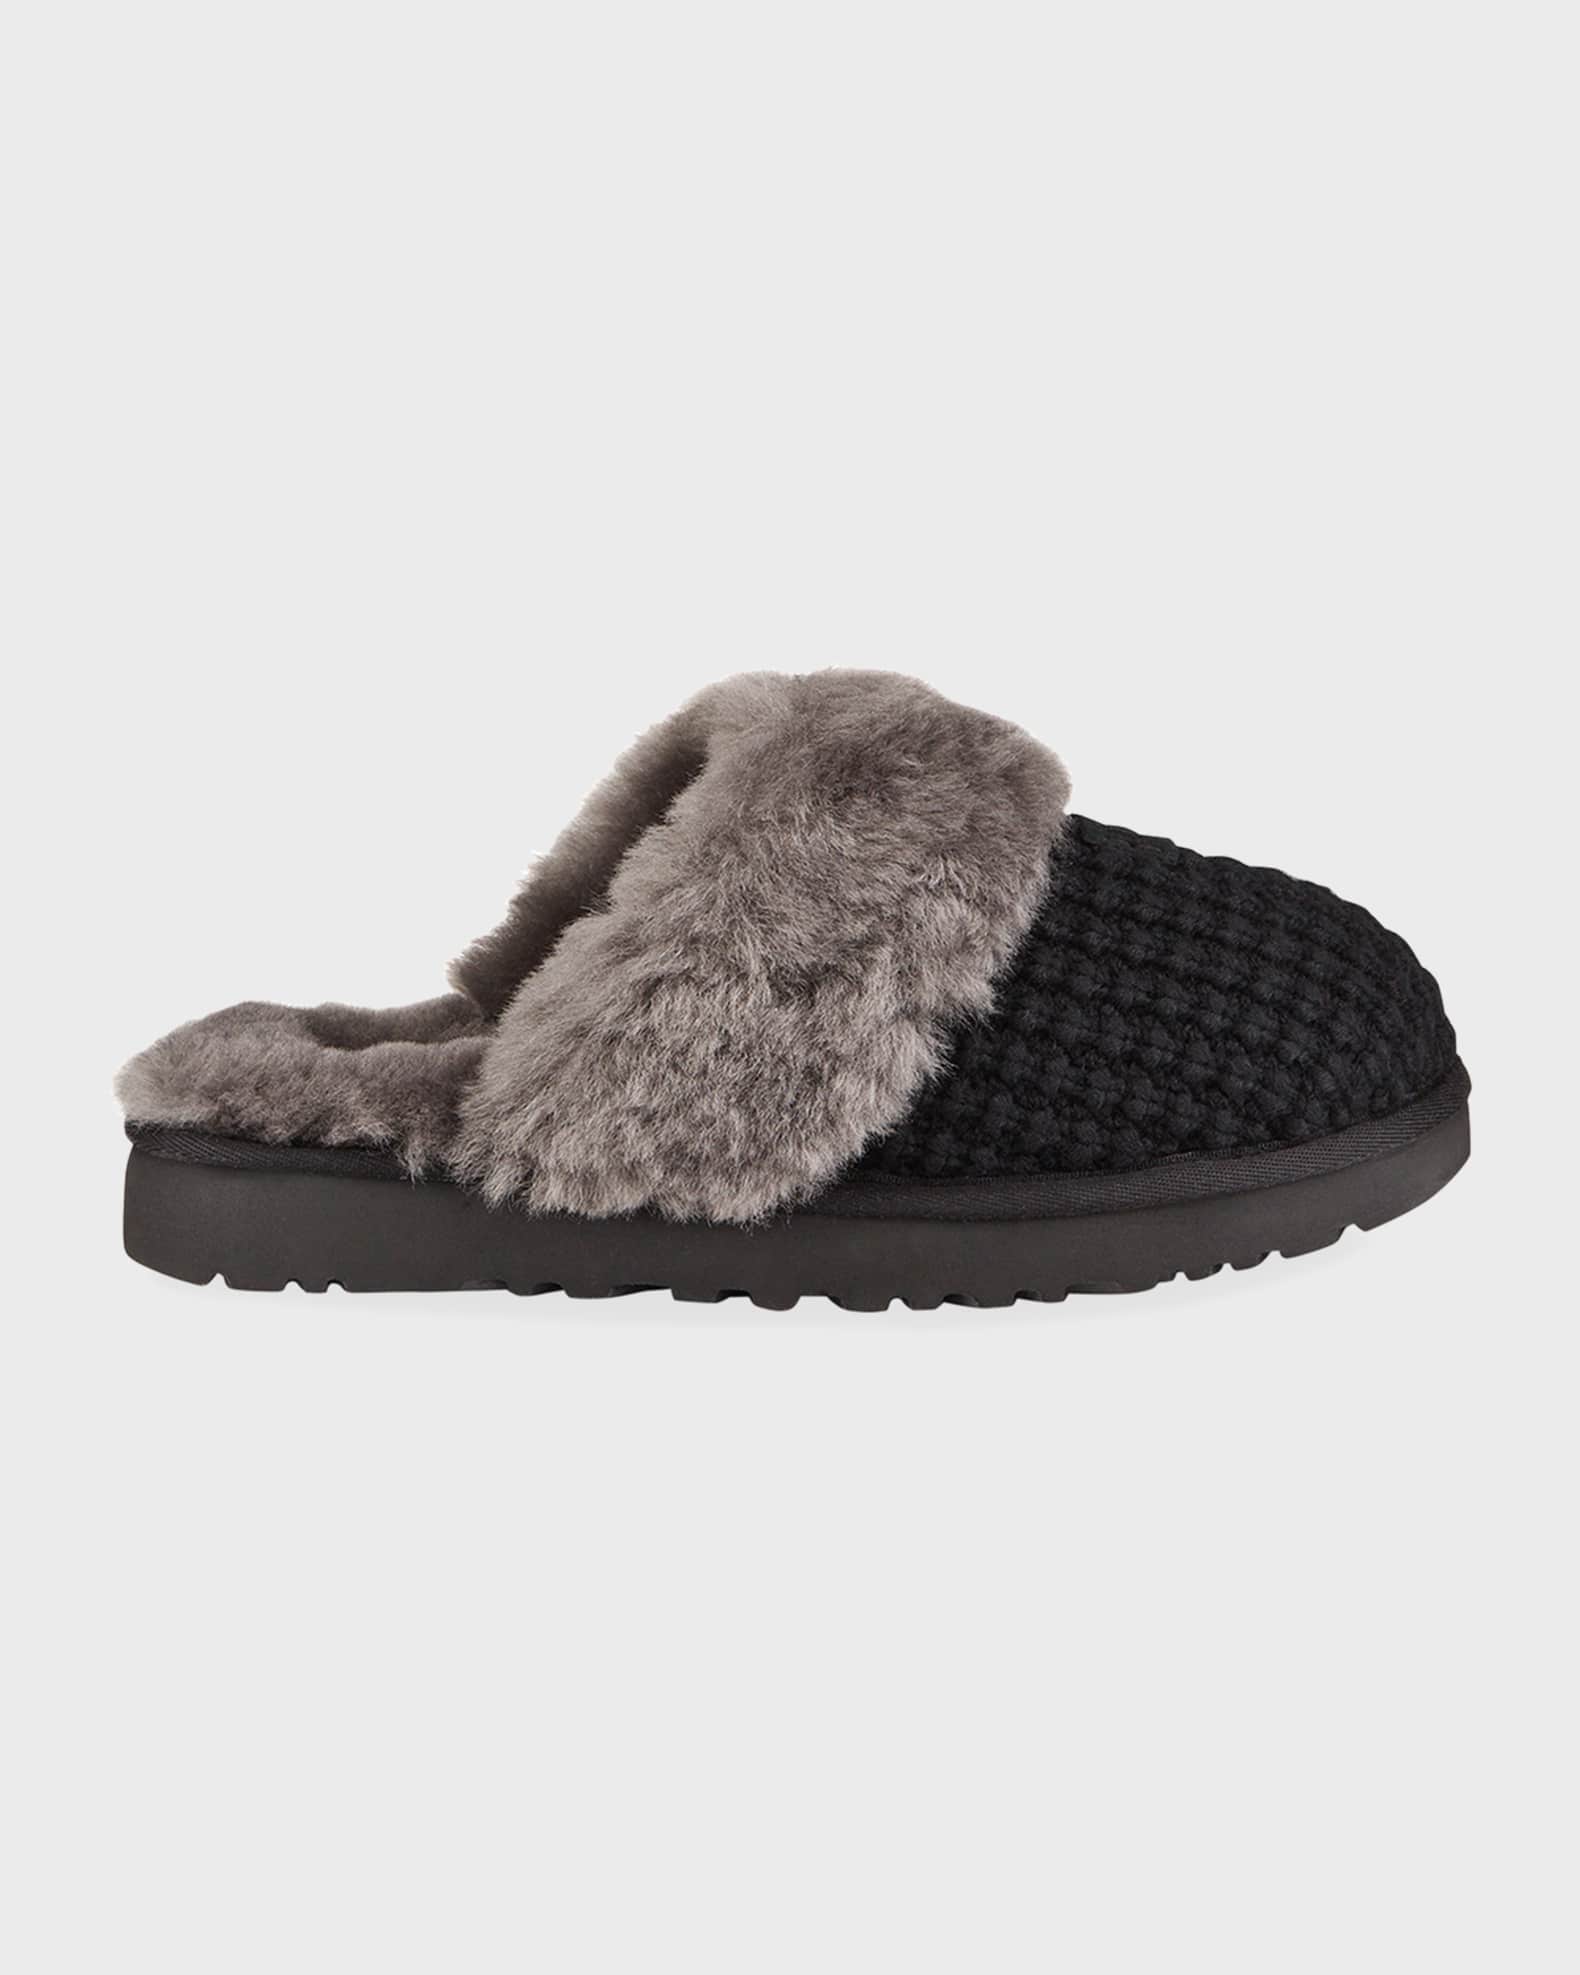 UGG Cozy Knit Shearling Slippers | Neiman Marcus